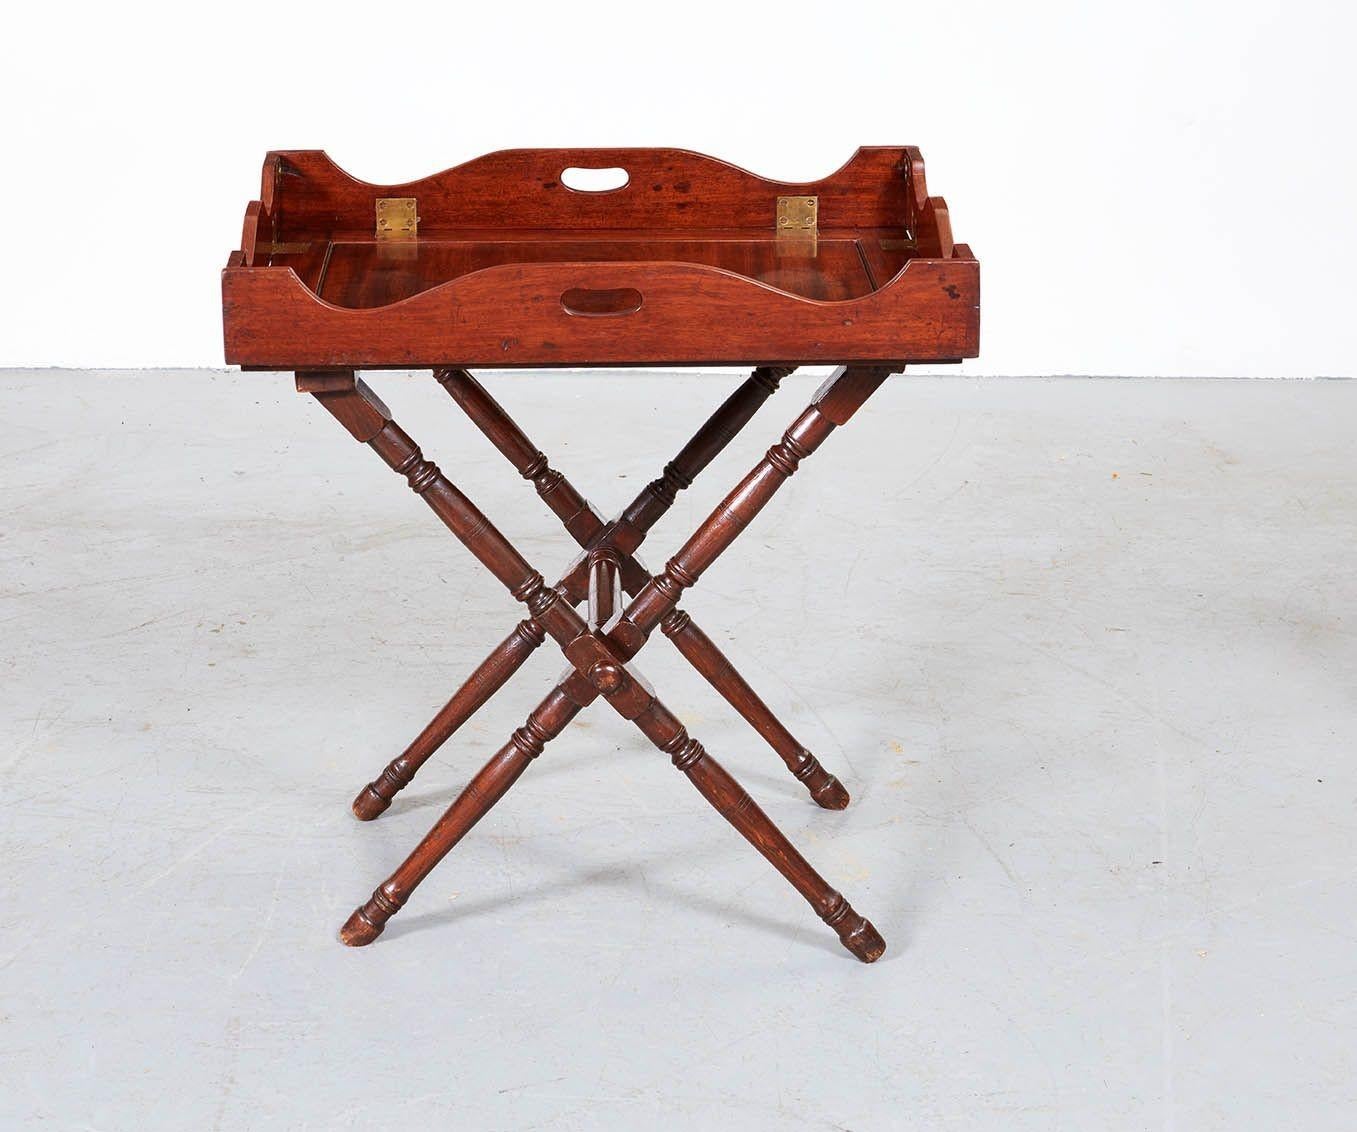 A high-quality mahogany bar stand, also known as a butler's tray, having four shaped and moveable sides secured by brass button locks and hinges, with carrying handles to two sides. The tray sits on a folding stand with canvas retaining straps. The